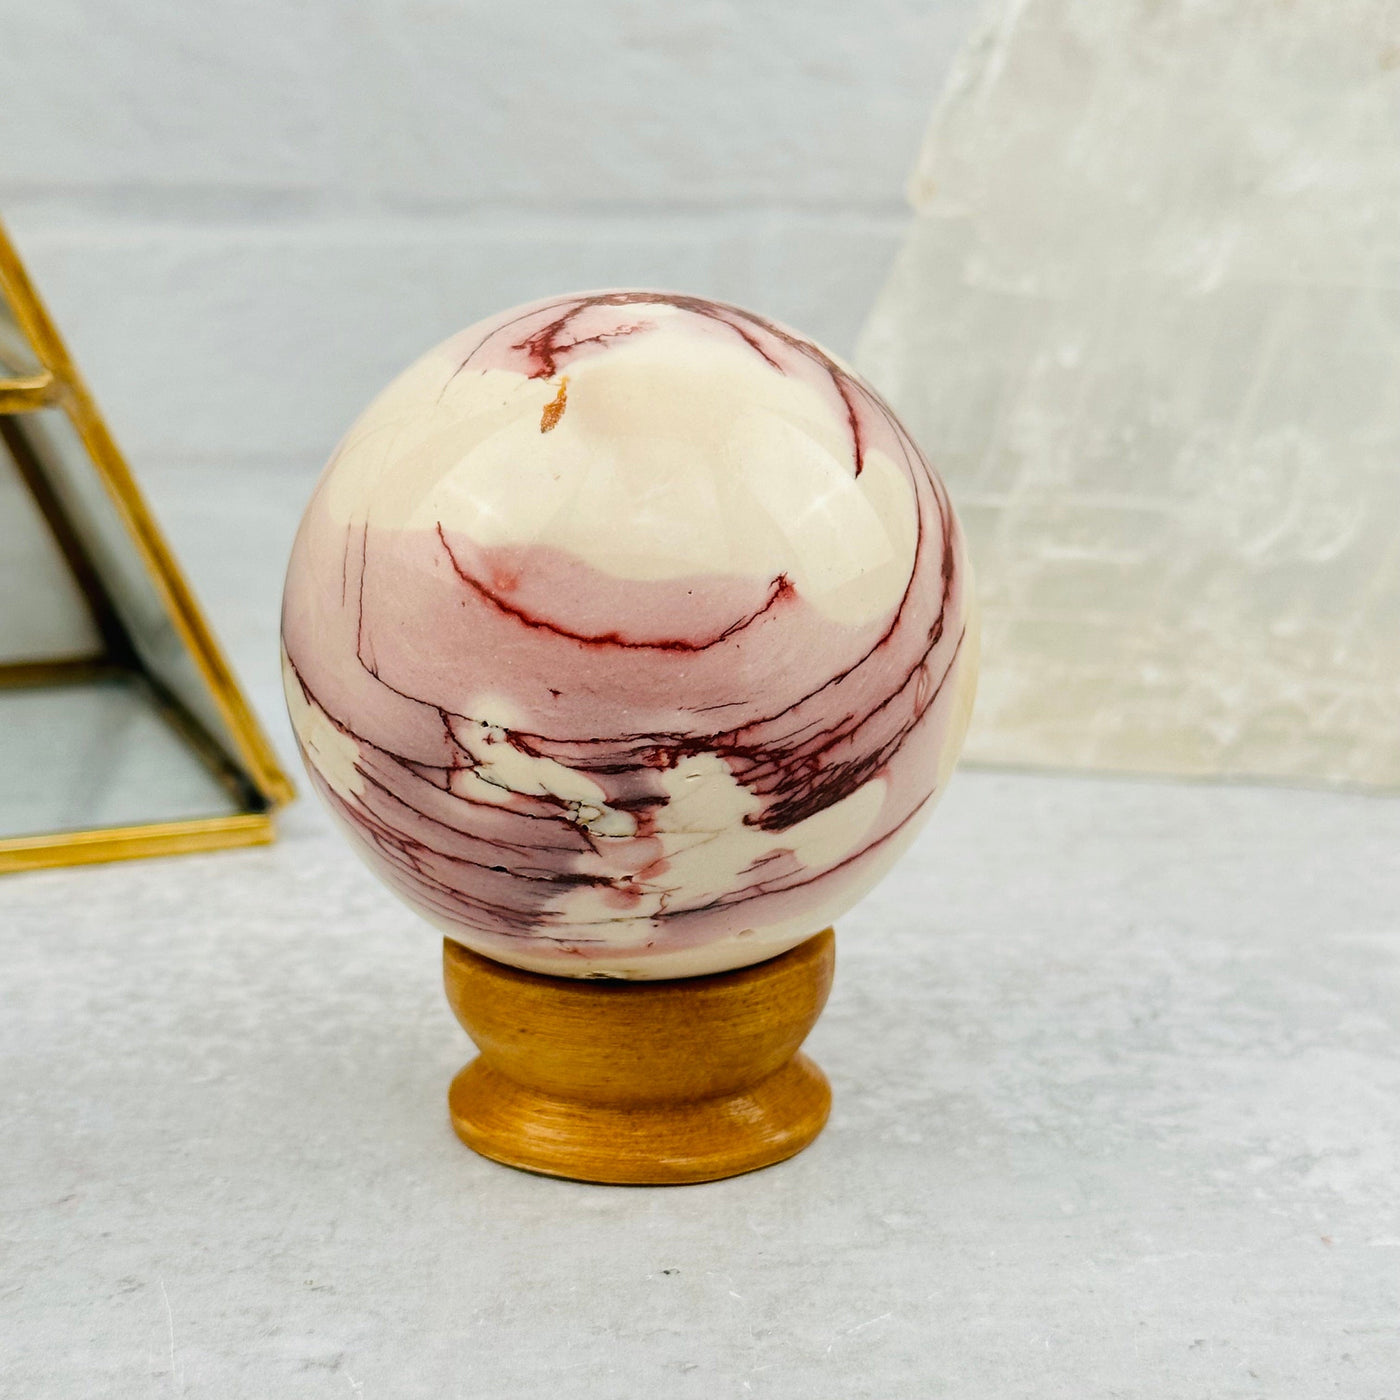 Mookaite Polished Sphere displayed as home decor